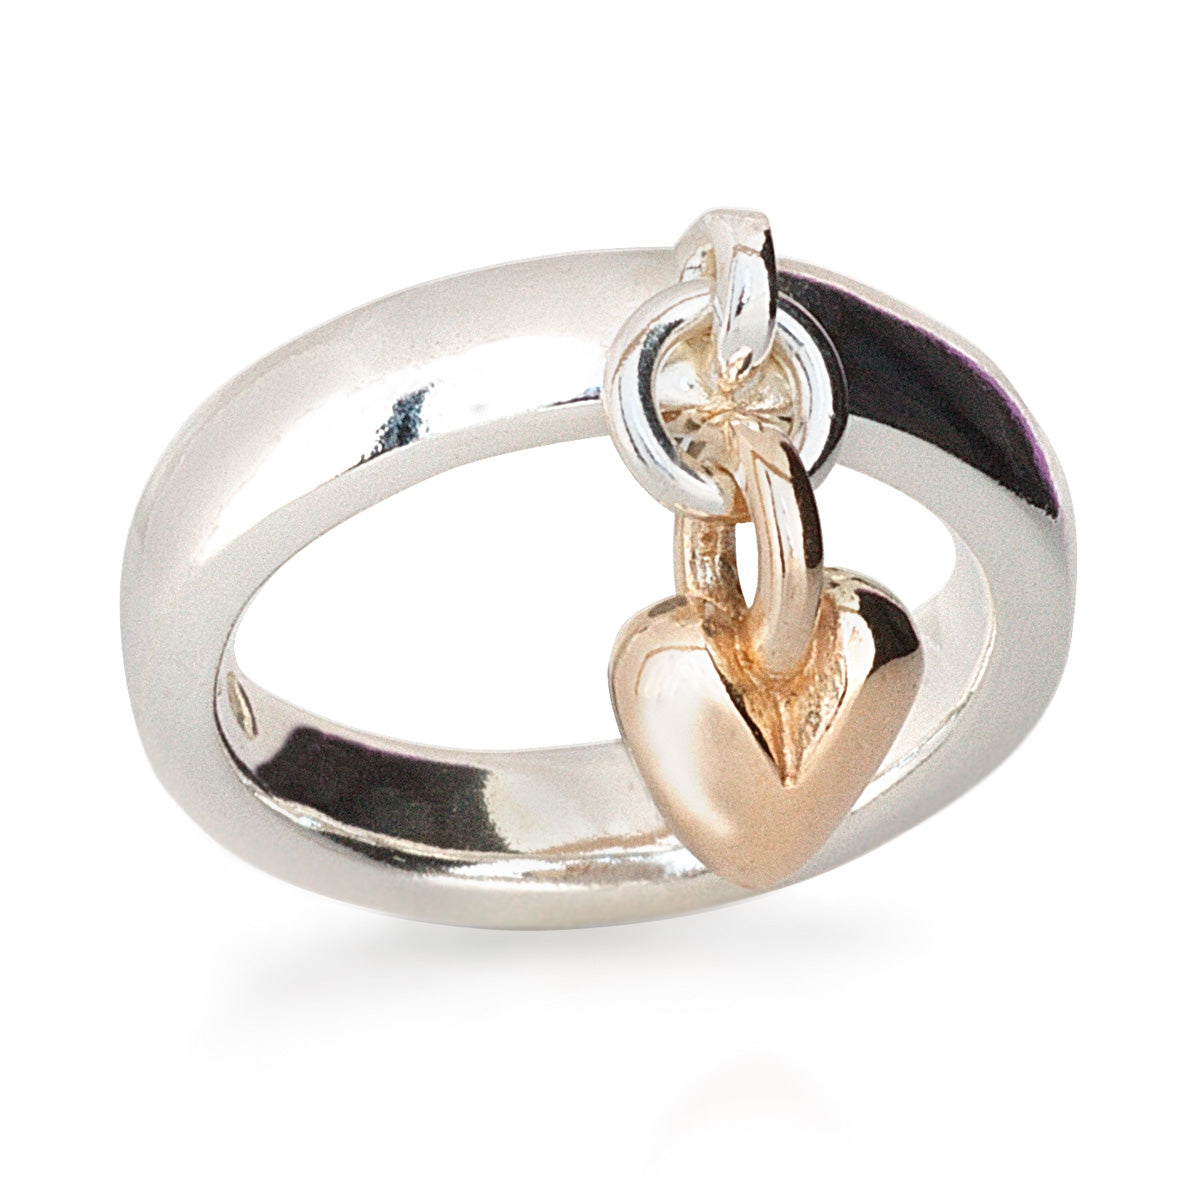 solid silver & recycled solid gold heart charm ring designer womens scarlett jewellery UK